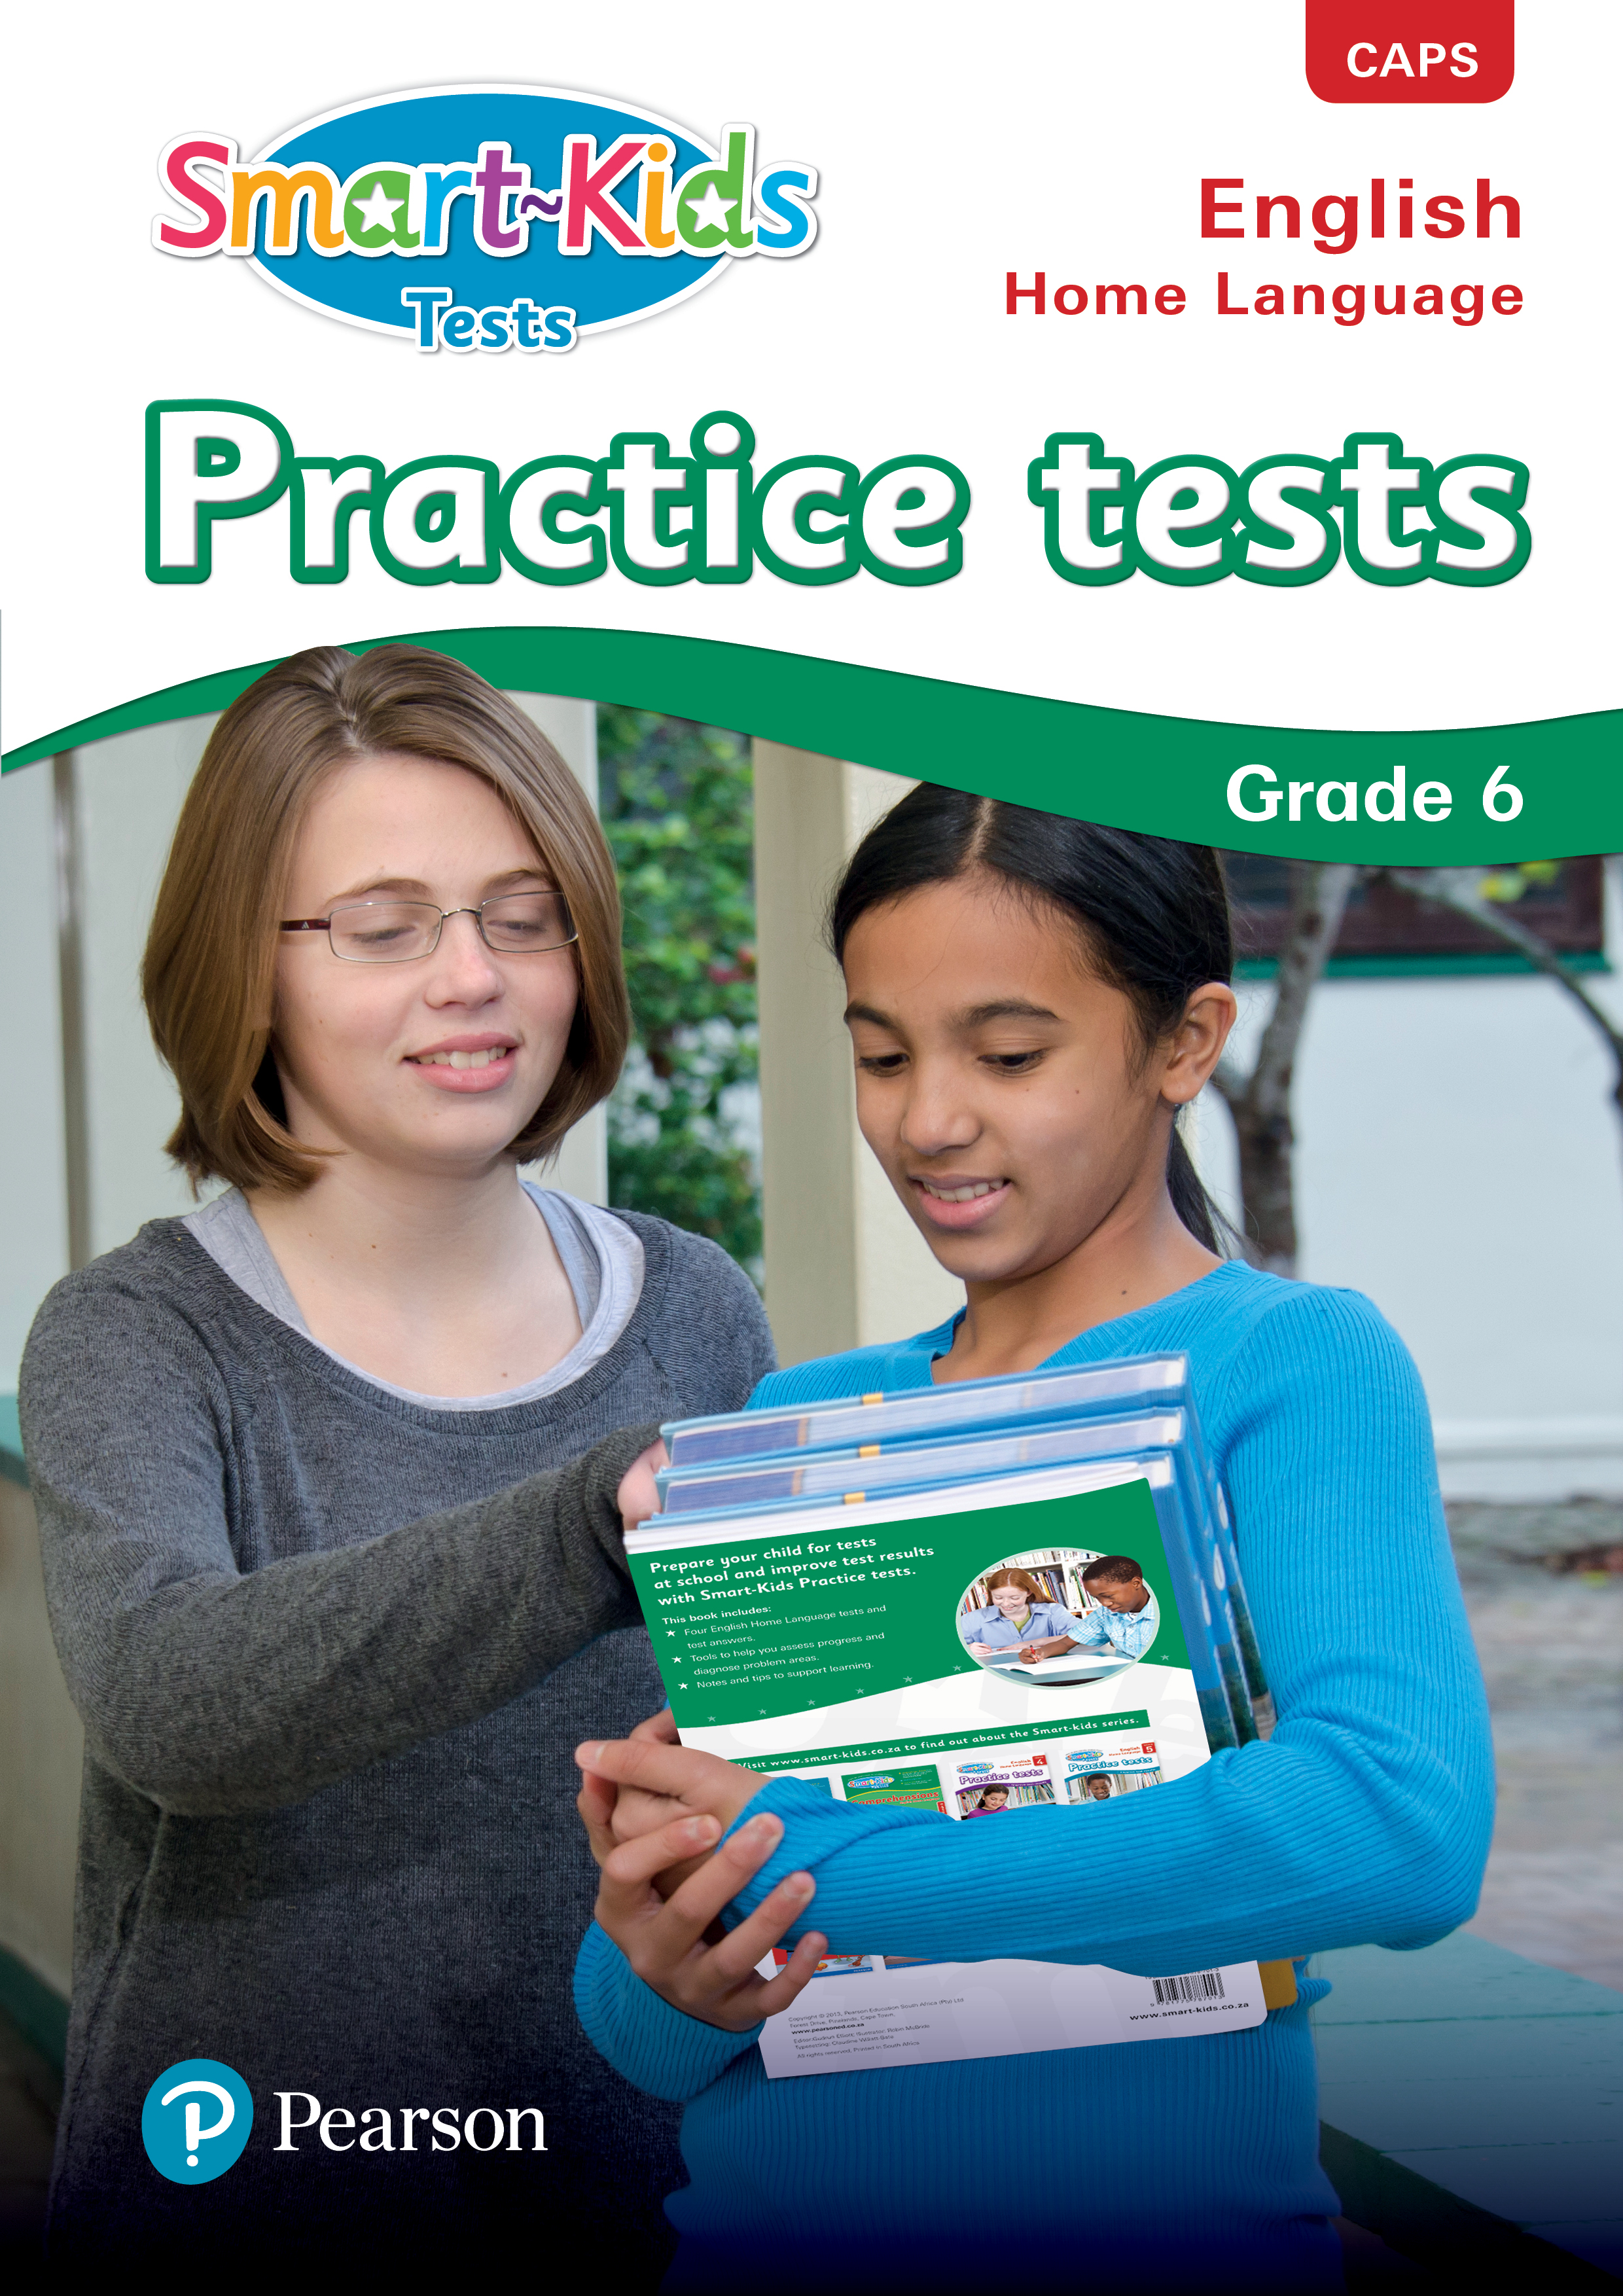 Picture of Smart-kids practice tests English